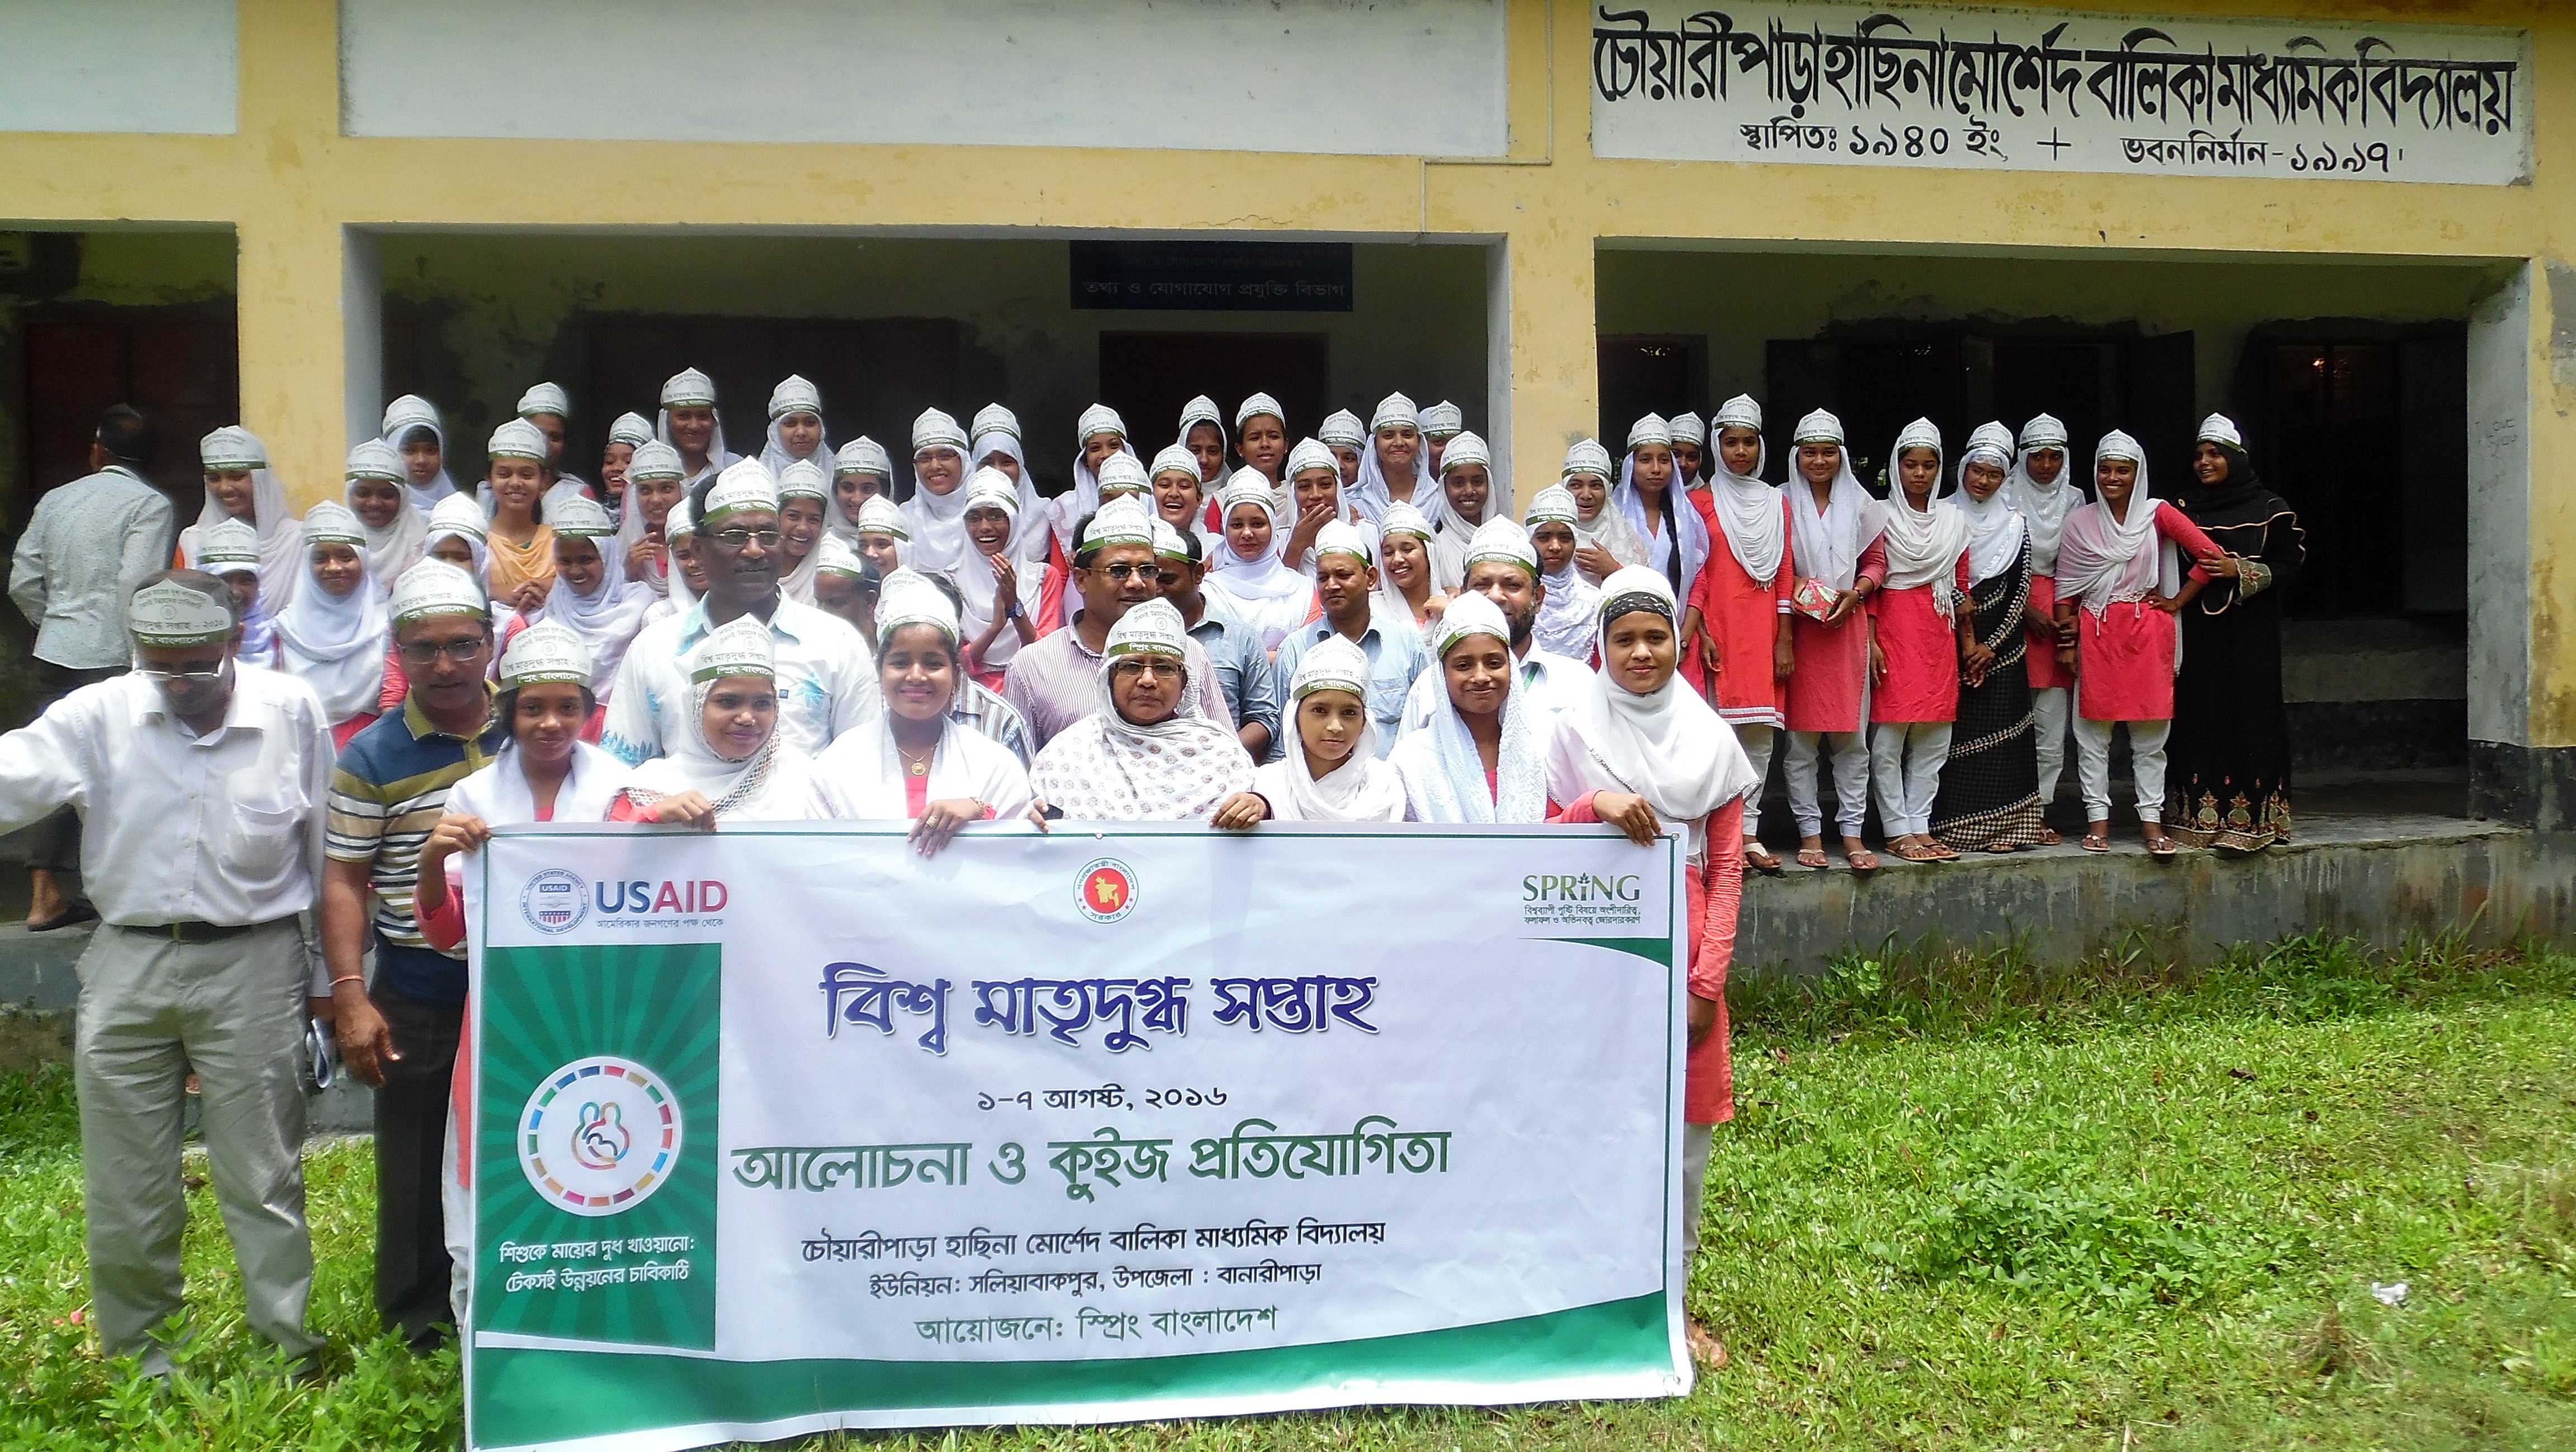 Participants in a quiz competition at Hasina Morshed Girls School in Banaripara